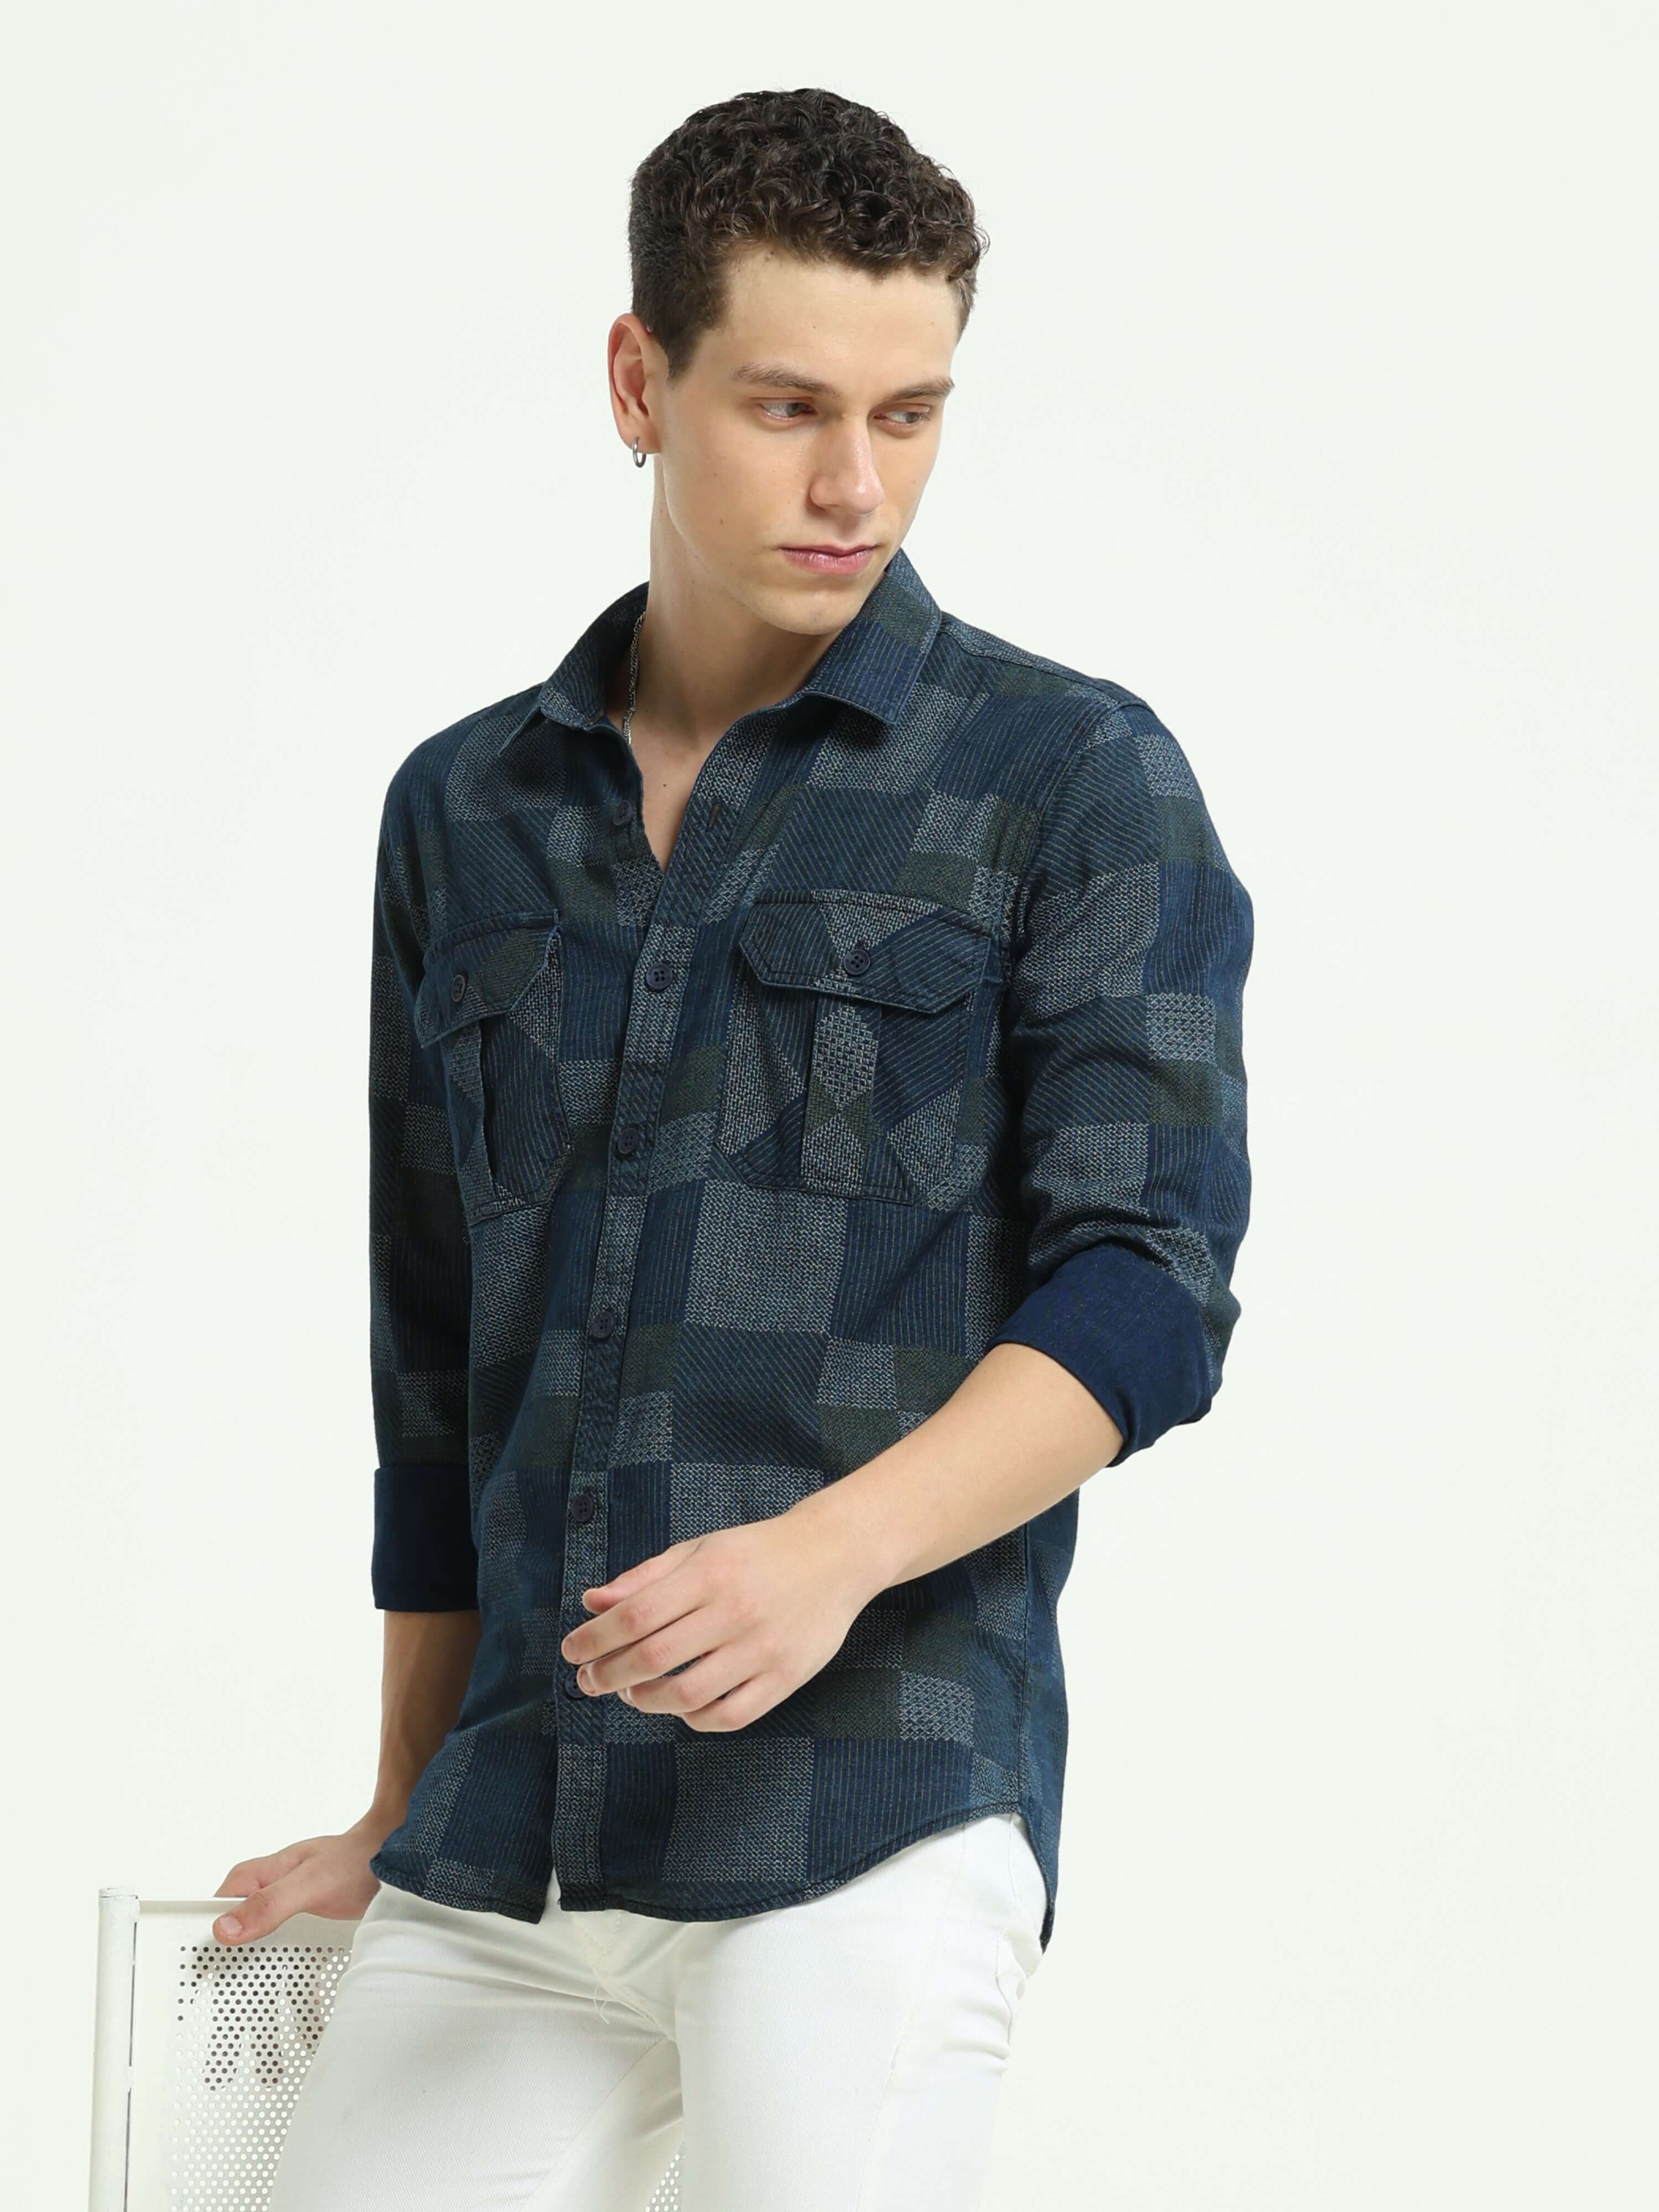 Denim multi blocked check casual shirt shop online at Estilocus. 100% Cotton • Full-sleeve check shirt• Cut and sew placket• Regular collar• Double button edge cuff • Double pocket with flap • Curved bottom hemline . • All double needle construction, fine